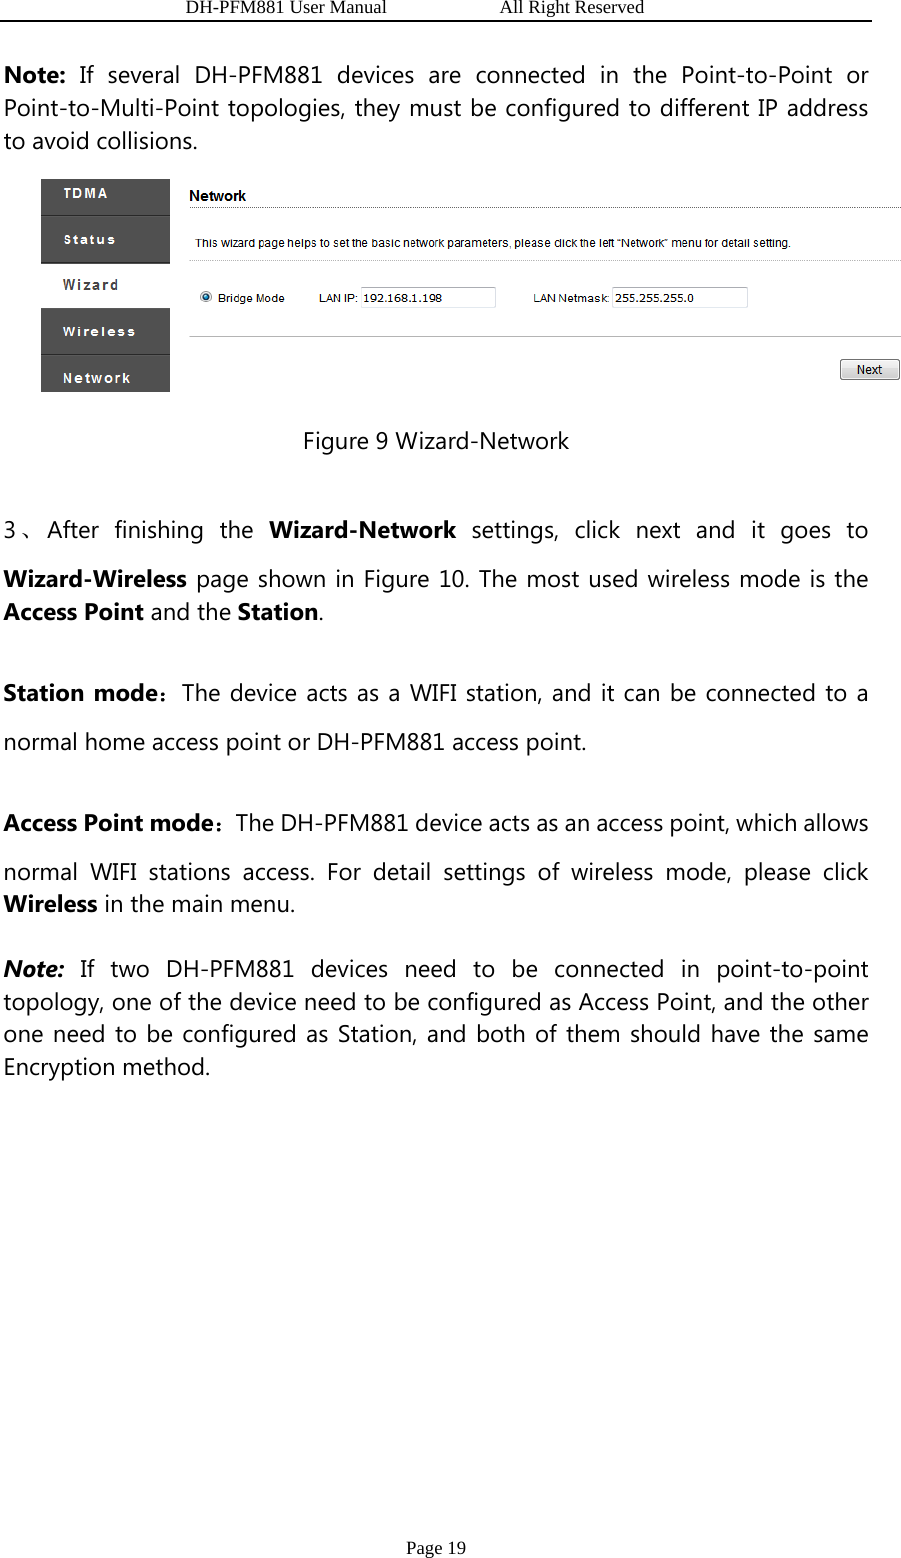                   DH-PFM881 User Manual            All Right Reserved Page 19 Note: If several DH-PFM881 devices are connected in the Point-to-Point or Point-to-Multi-Point topologies, they must be configured to different IP address to avoid collisions.  Figure 9 Wizard-Network 3、After finishing the Wizard-Network settings, click next and it goes to Wizard-Wireless page shown in Figure 10. The most used wireless mode is the Access Point and the Station. Station mode：The device acts as a WIFI station, and it can be connected to a normal home access point or DH-PFM881 access point. Access Point mode：The DH-PFM881 device acts as an access point, which allows normal WIFI stations access. For detail settings of wireless mode, please click Wireless in the main menu. Note: If two DH-PFM881 devices need to be connected in point-to-point topology, one of the device need to be configured as Access Point, and the other one need to be configured as Station, and both of them should have the same Encryption method. 